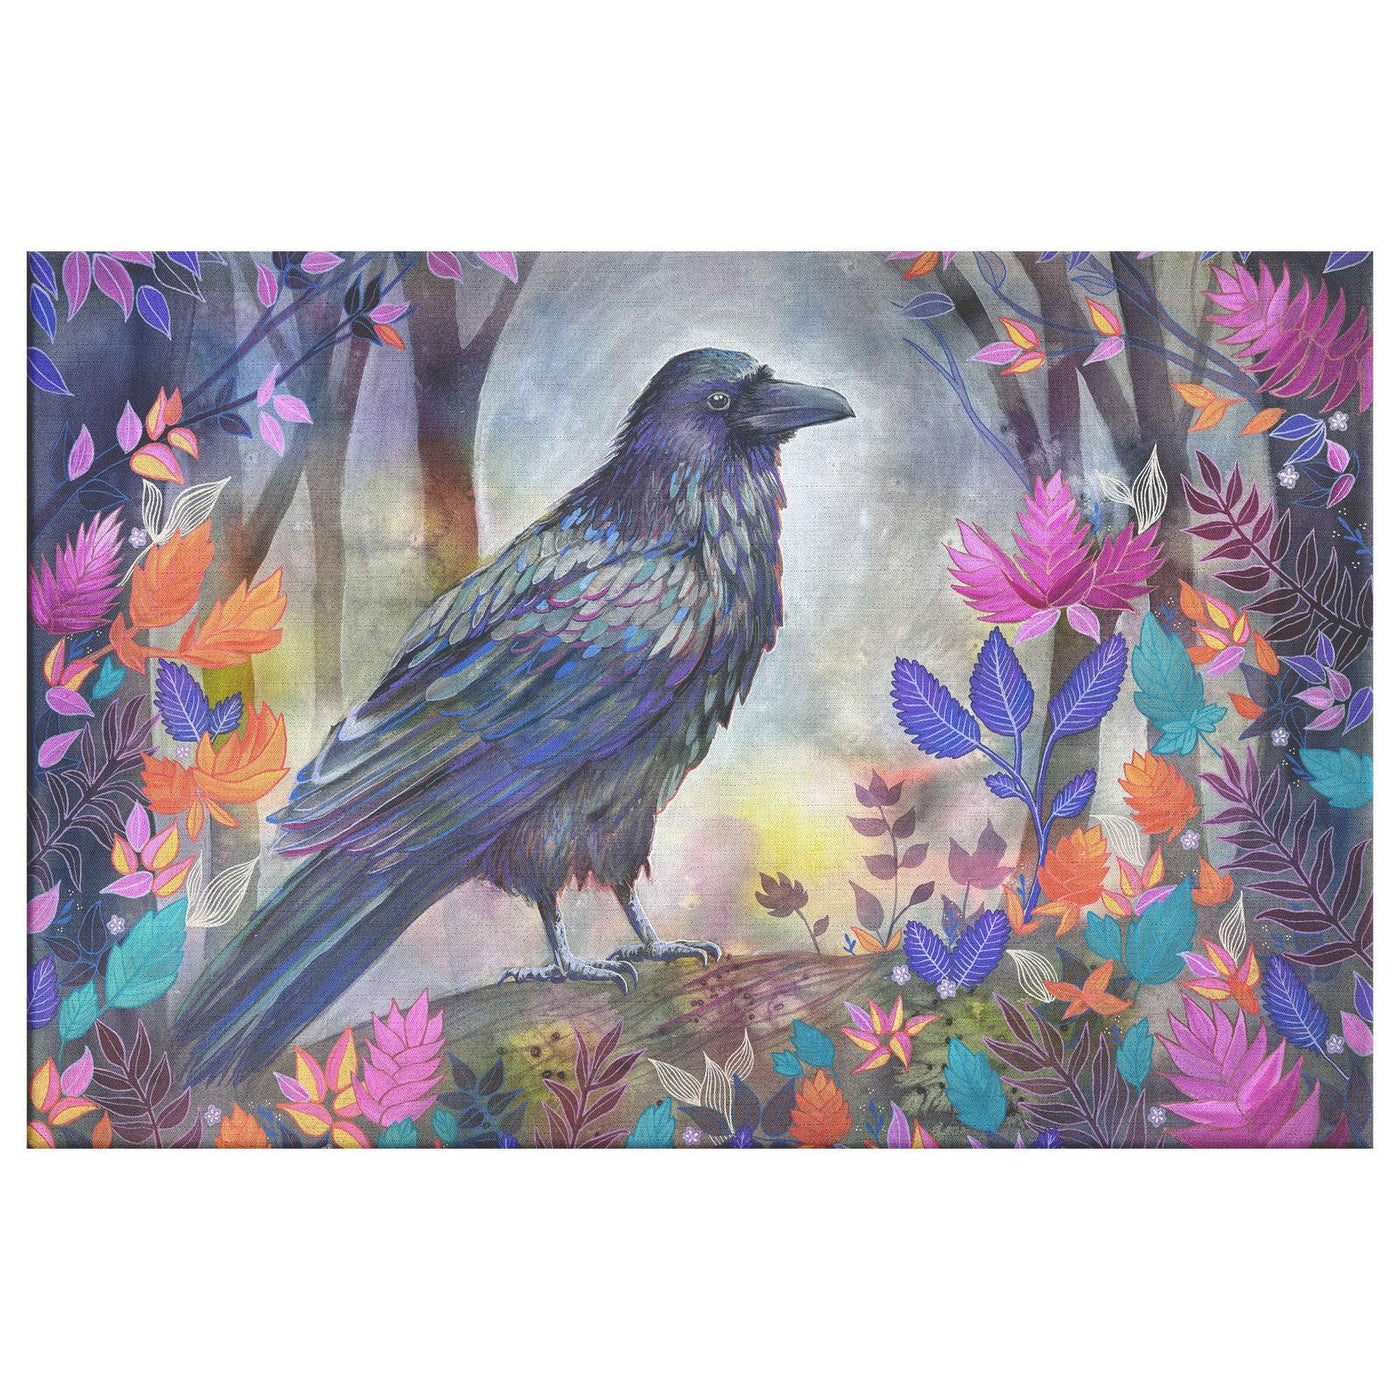 A vivid illustration of a Raven standing on a branch in a mystical forest with colorful, stylized leaves and a soft, glowing background.